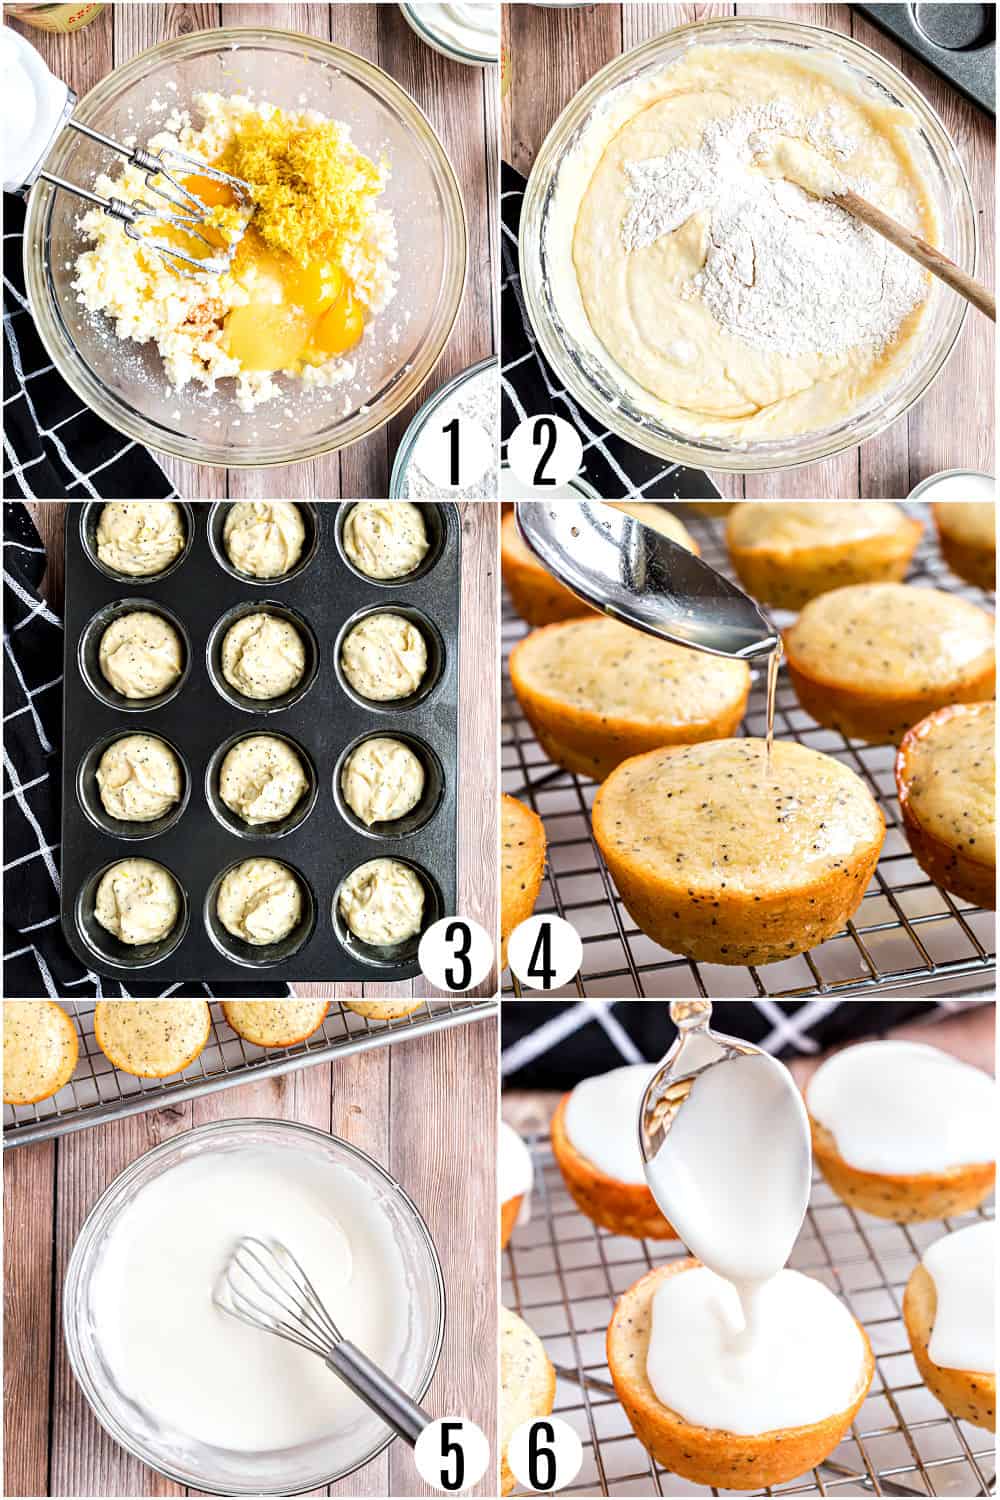 Step by step photos showing how to make lemon muffins.